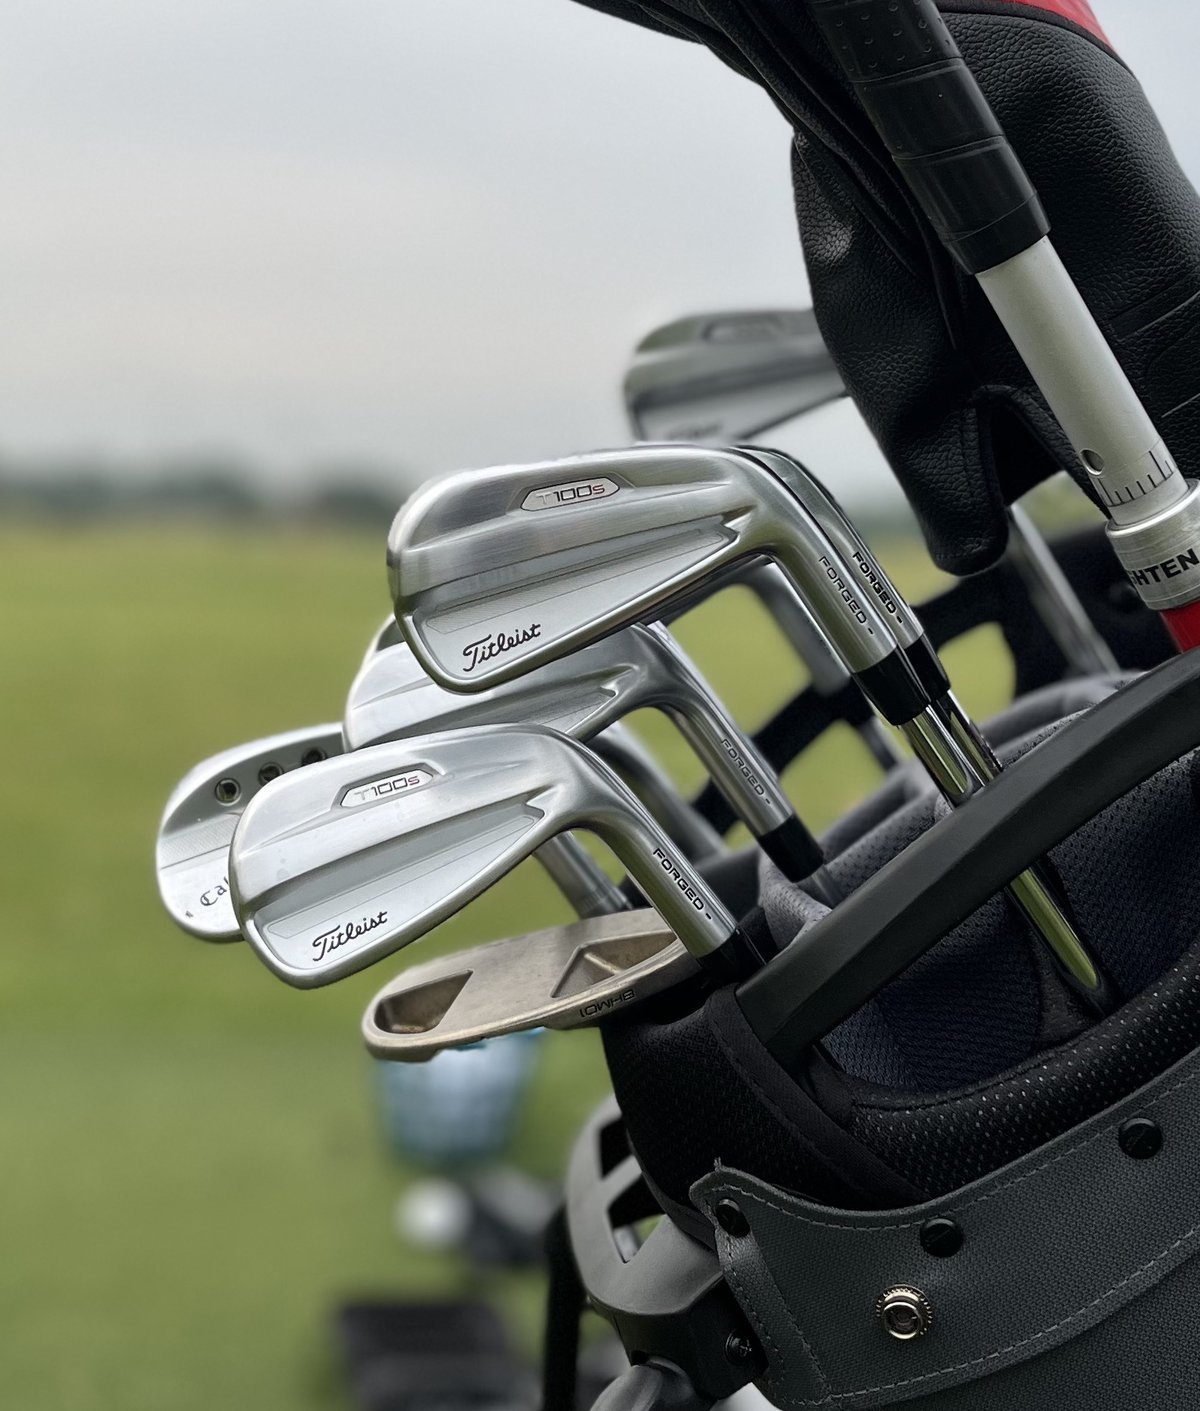 The Titleist T100S Irons